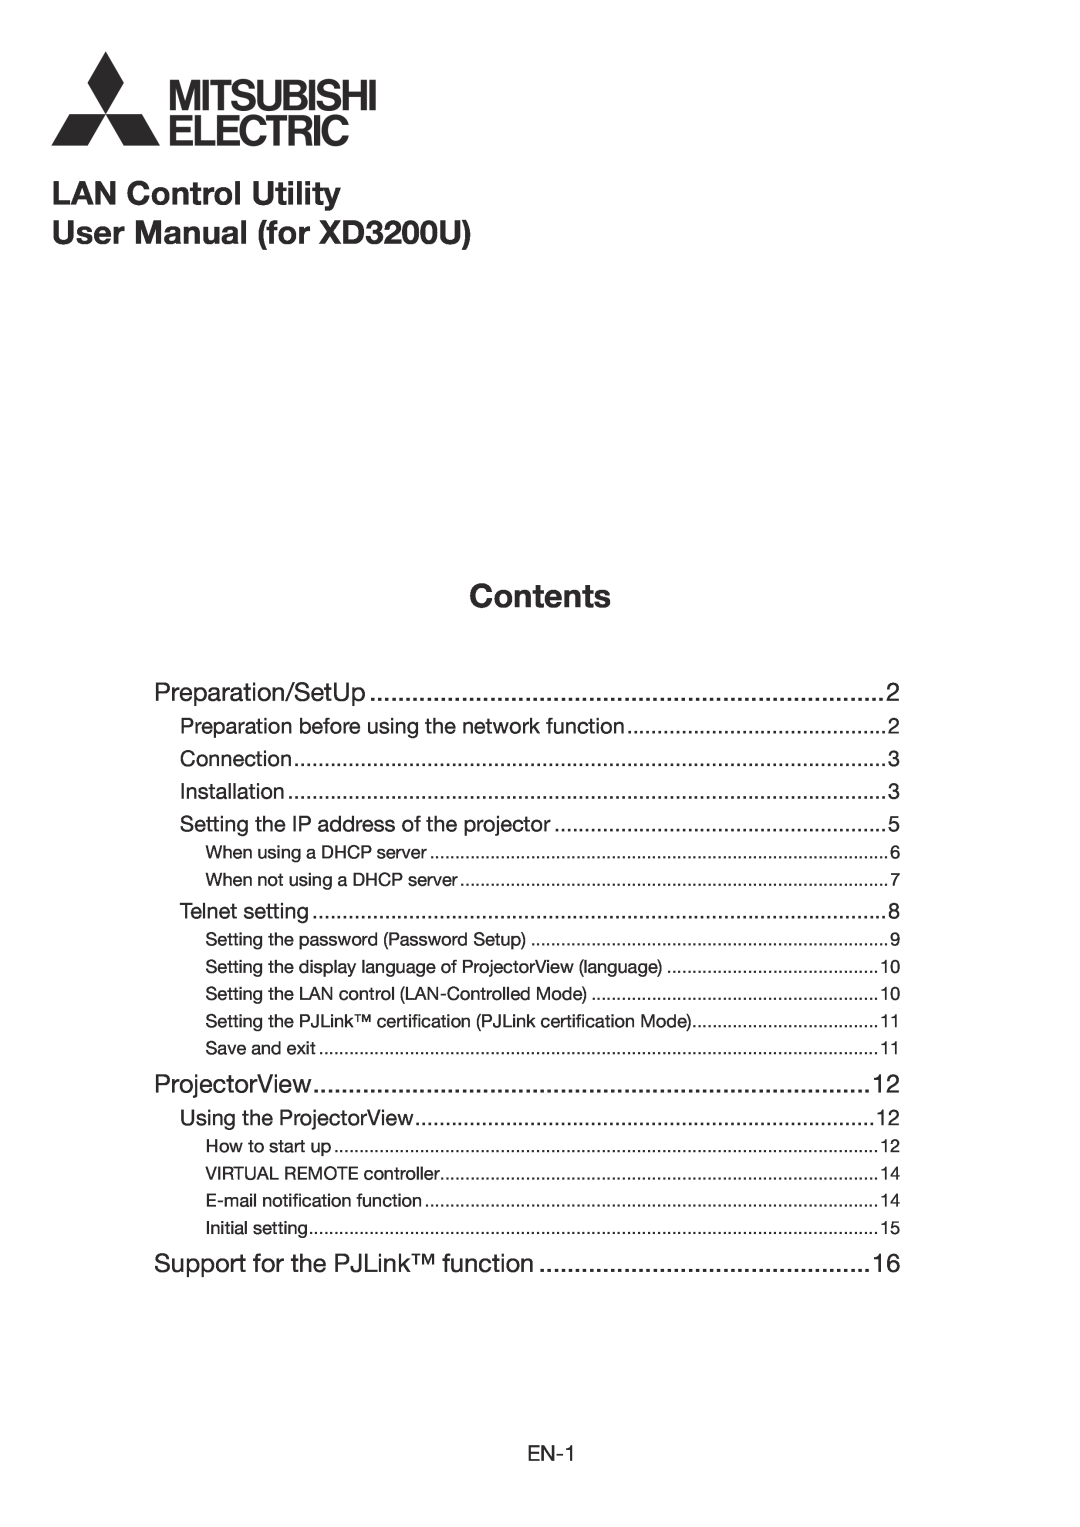 Mitsubishi Electronics user manual LAN Control Utility User Manual for XD3200U, Contents, Connection, Installation 